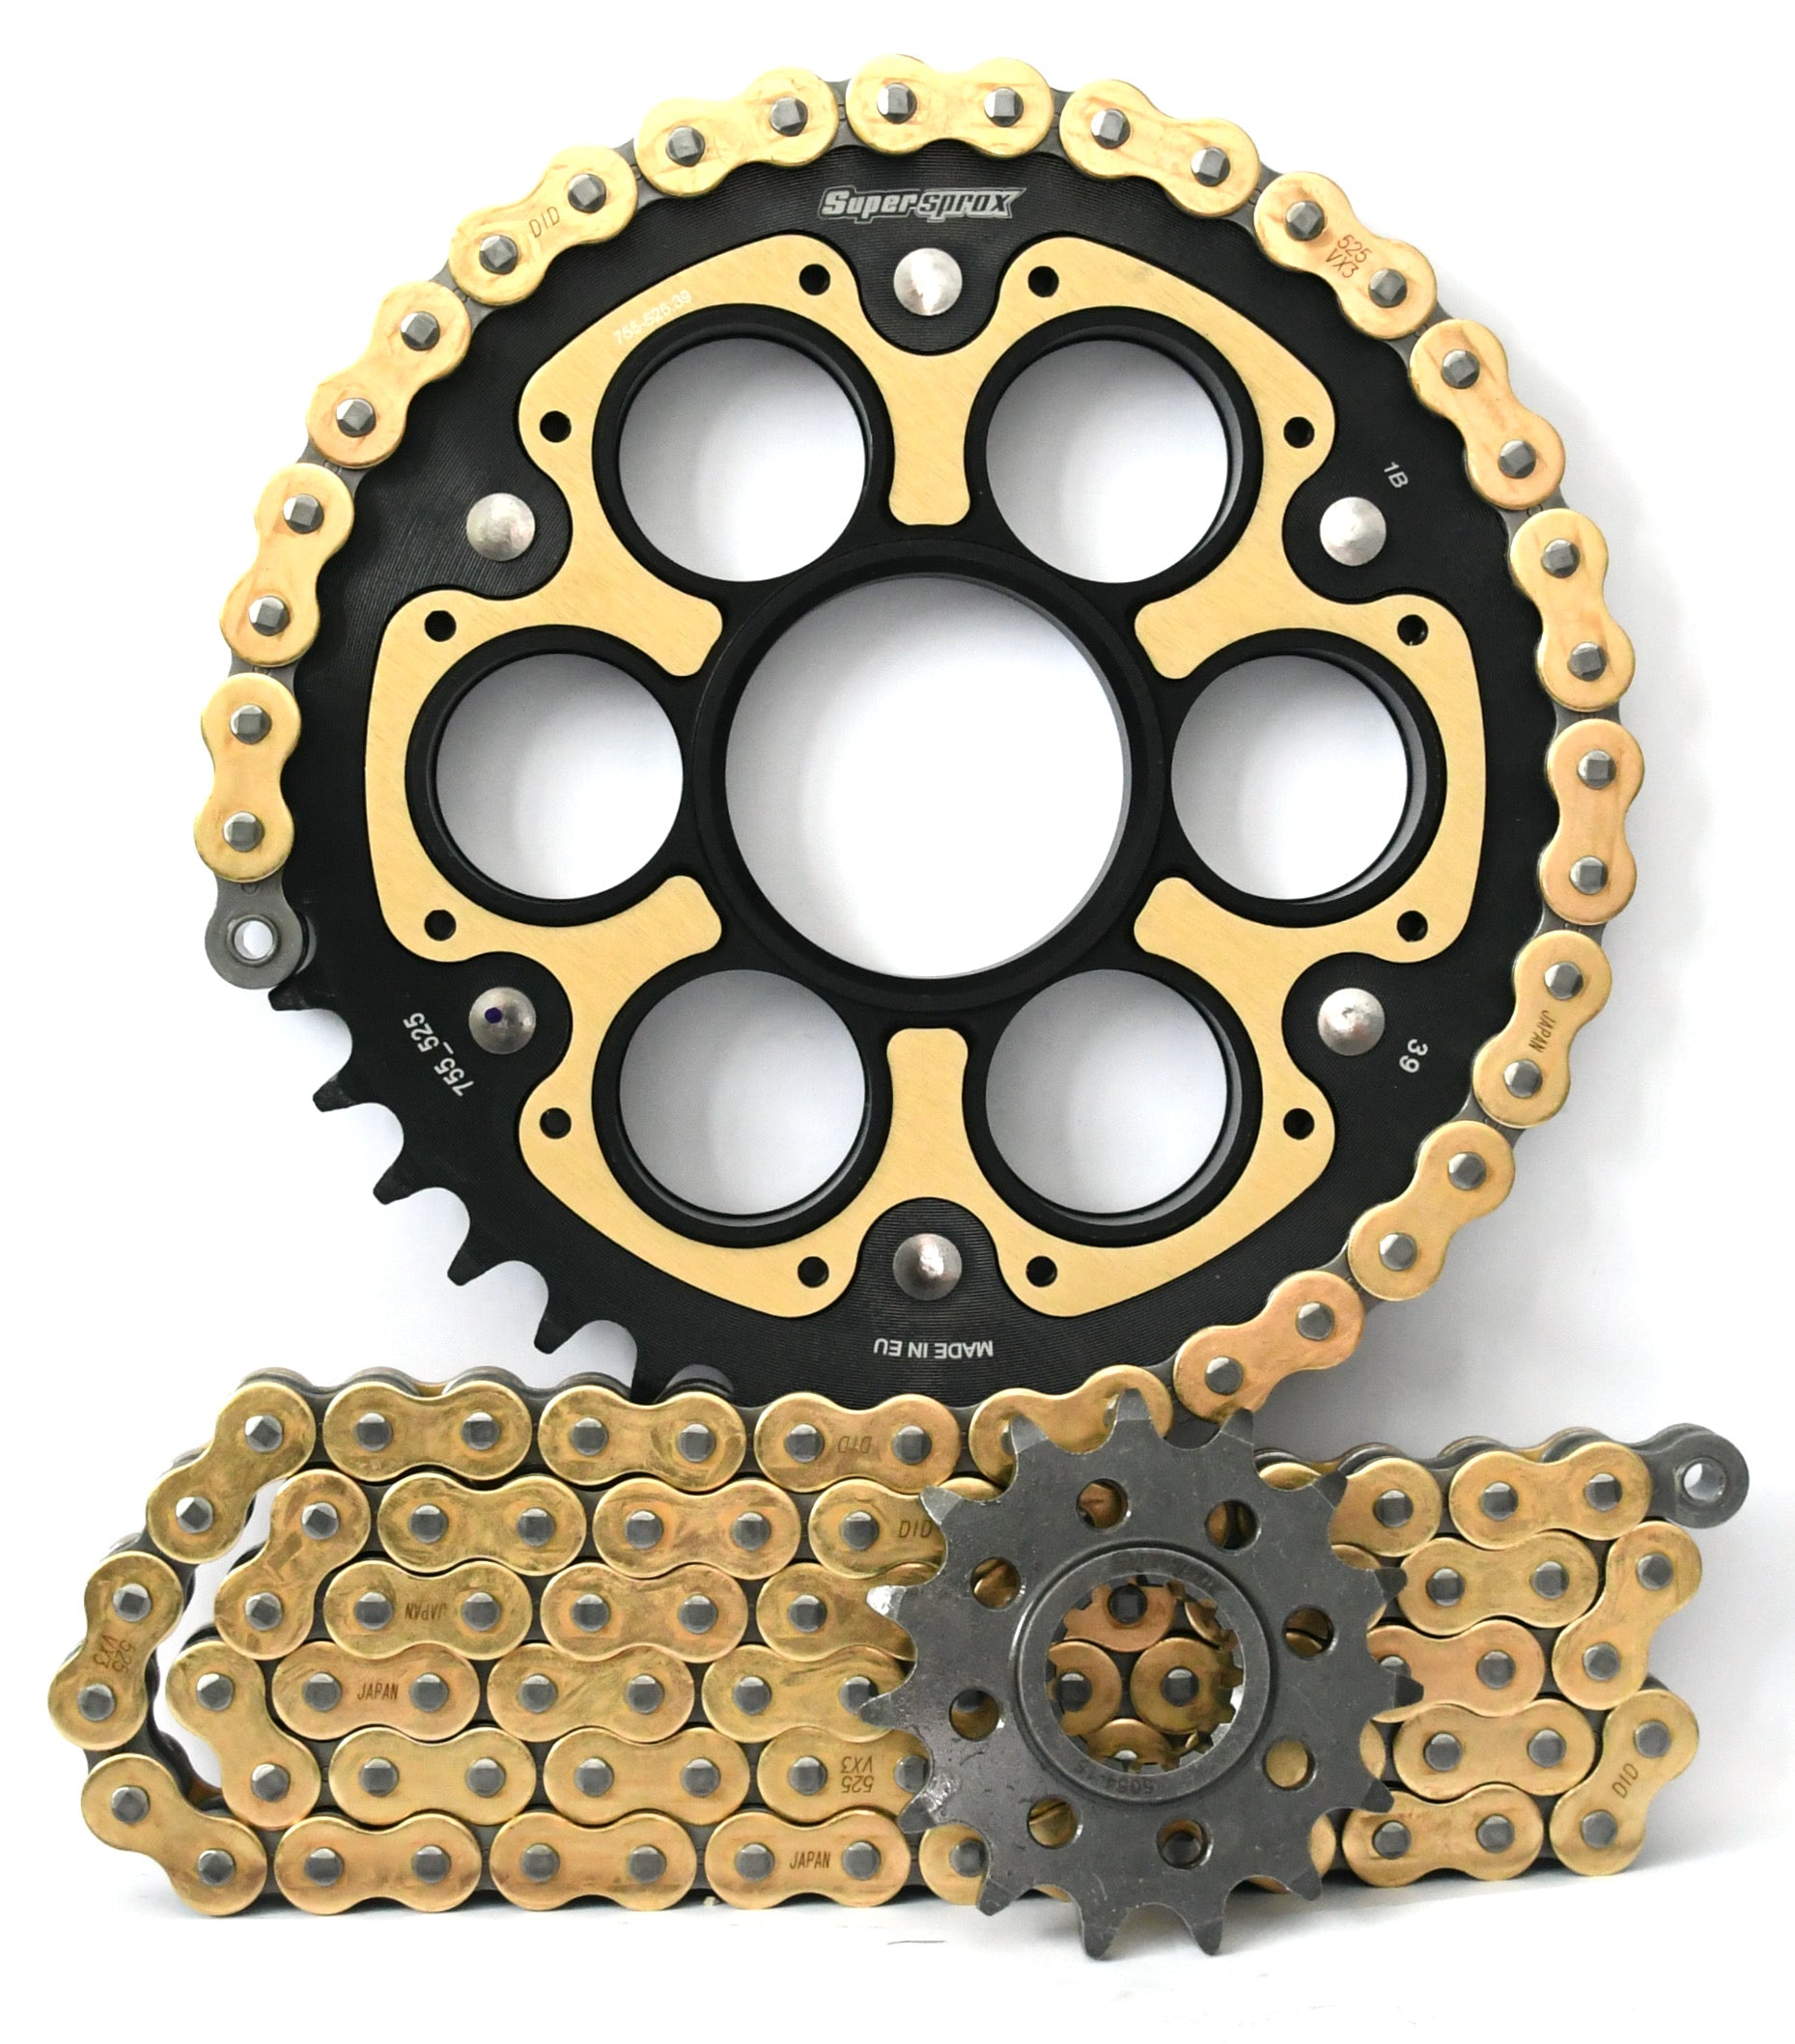 Supersprox Chain & Sprocket Kit for Ducati Panigale - Choose Your Gearing - 0